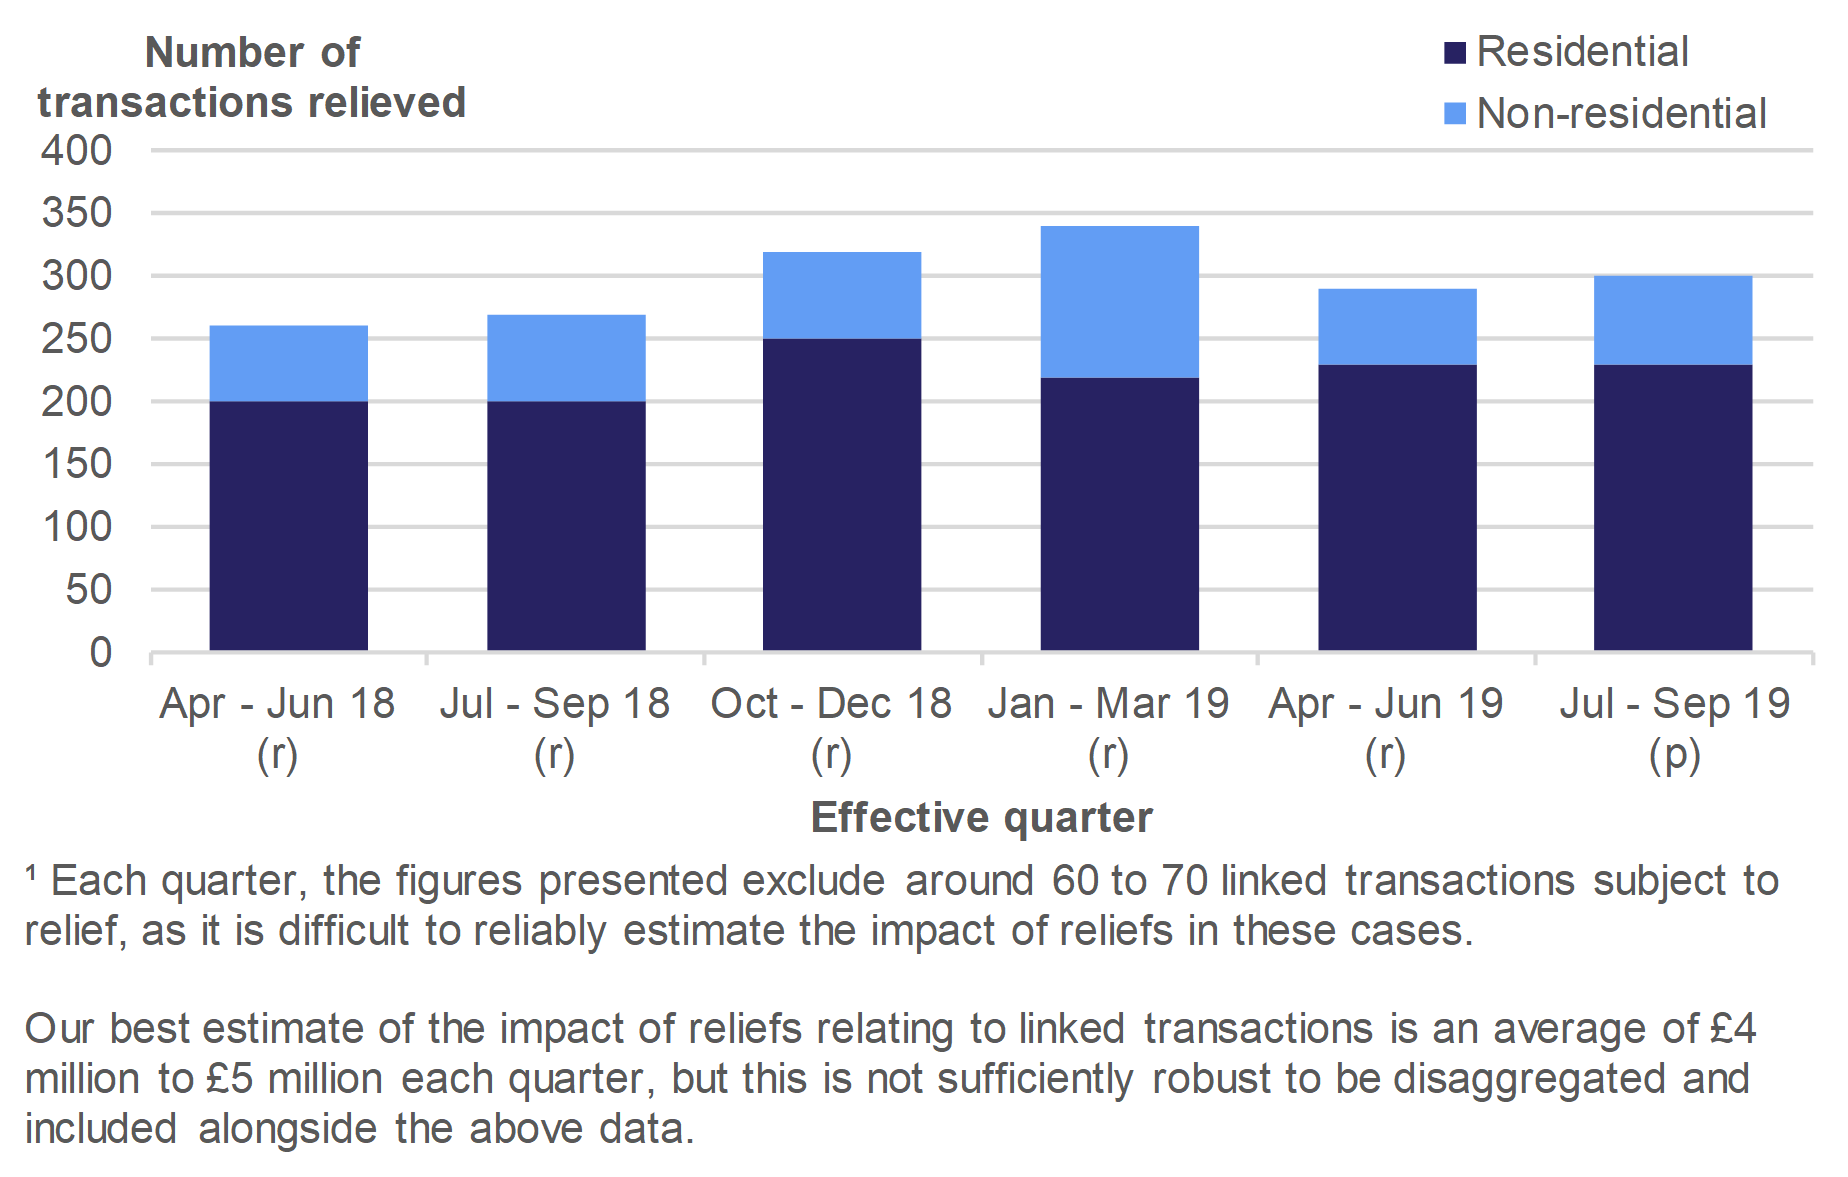 Figure 5.1 shows the number of reliefs applied to residential and non-residential transactions, by type of relief and quarter the transaction was relieved.